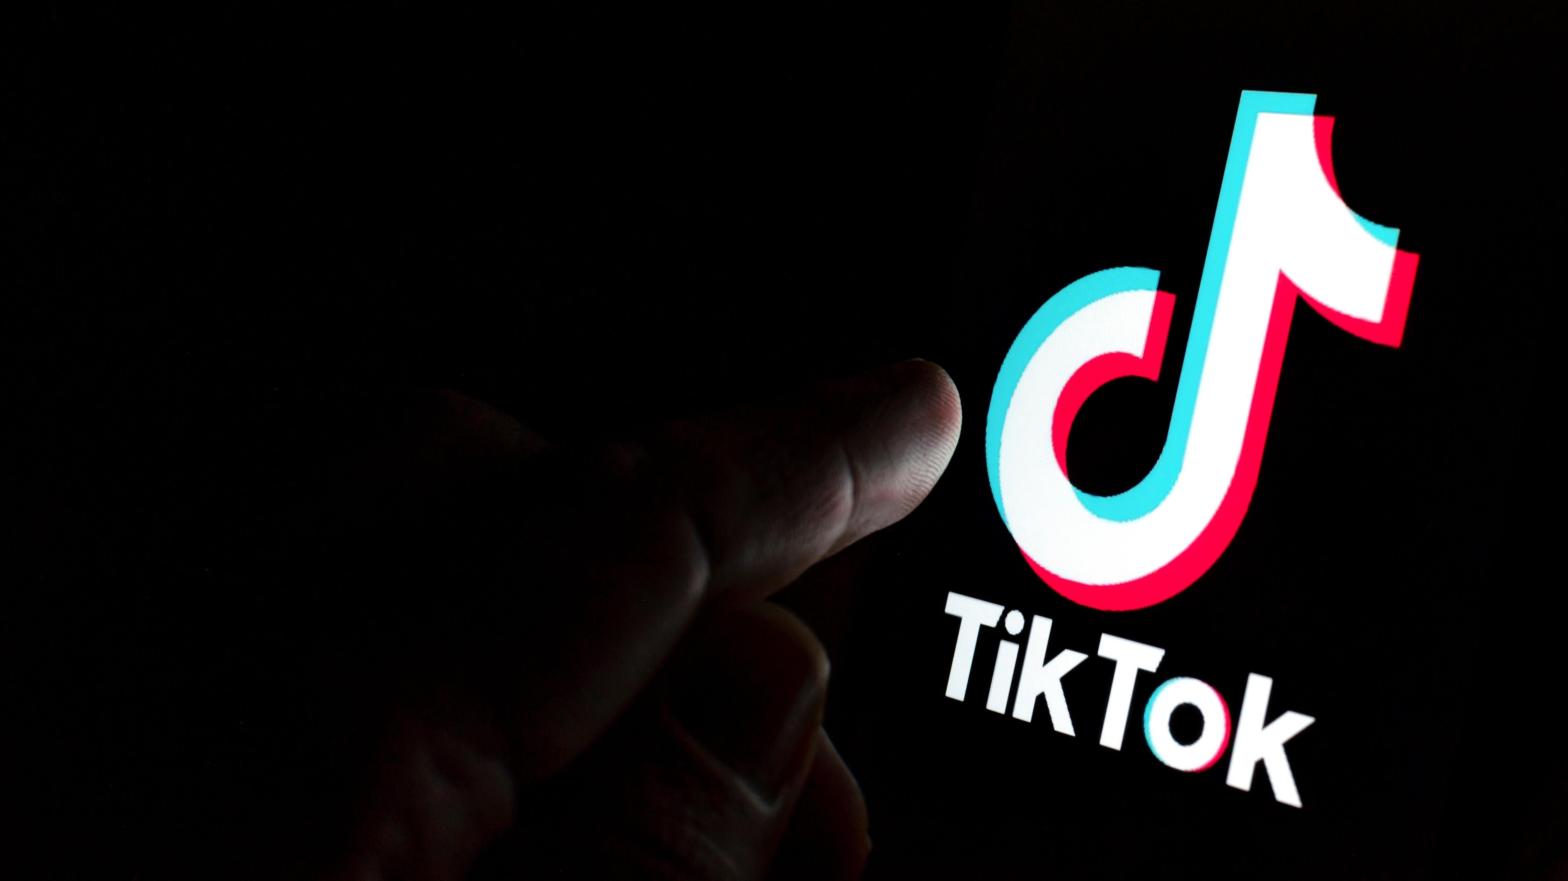 Chew recently took to TikTok to reveal that the app has 150 million American users active every month.  (Image: Ascannio, Shutterstock)